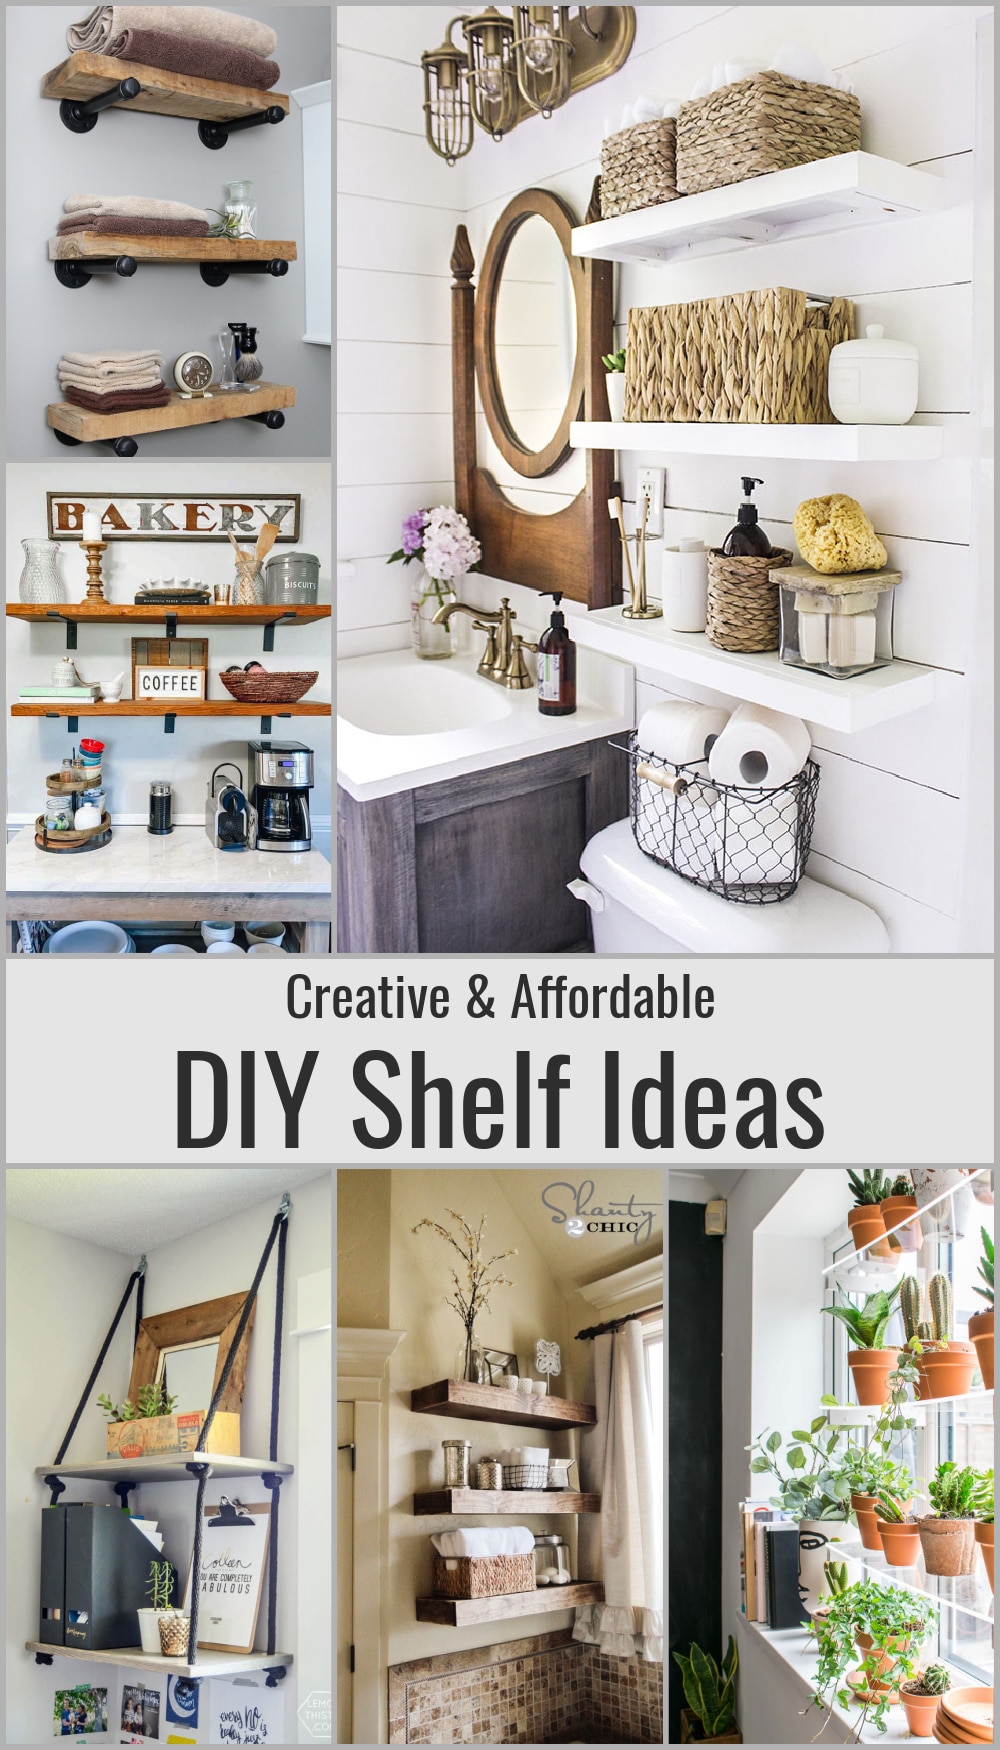 Learn how to make these stylish and budget-friendly DIY shelving projects in your own home. Easy step-by-step instructions to guide you through the process to create a more organized home this weekend.